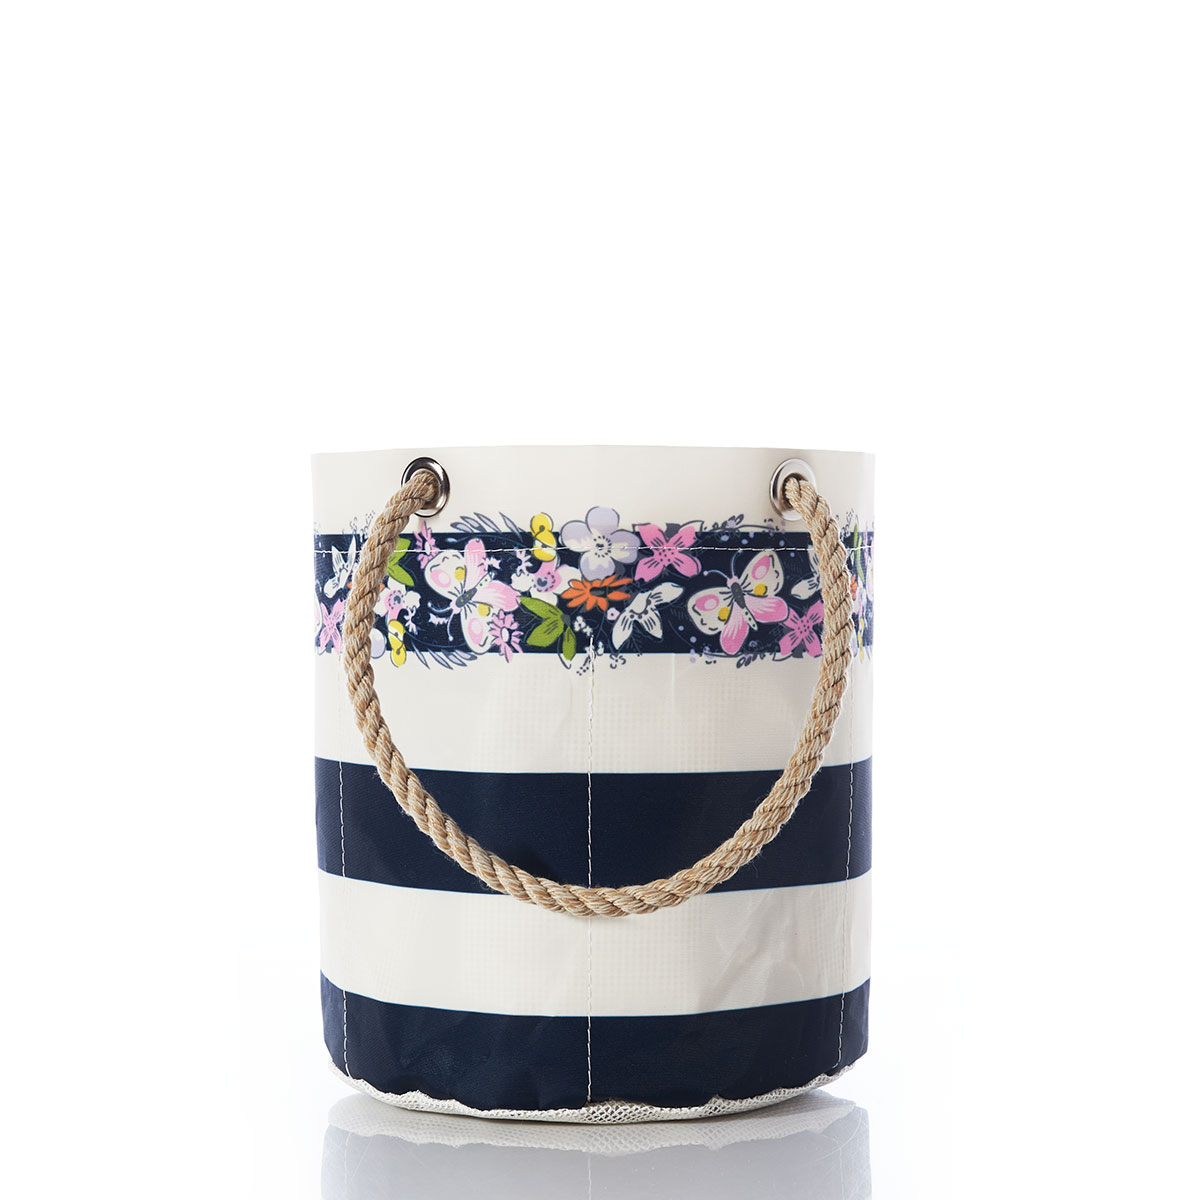 bold navy and white striped recycled sail cloth beverage bucket with hemp rope handles embellished with flowers around the top